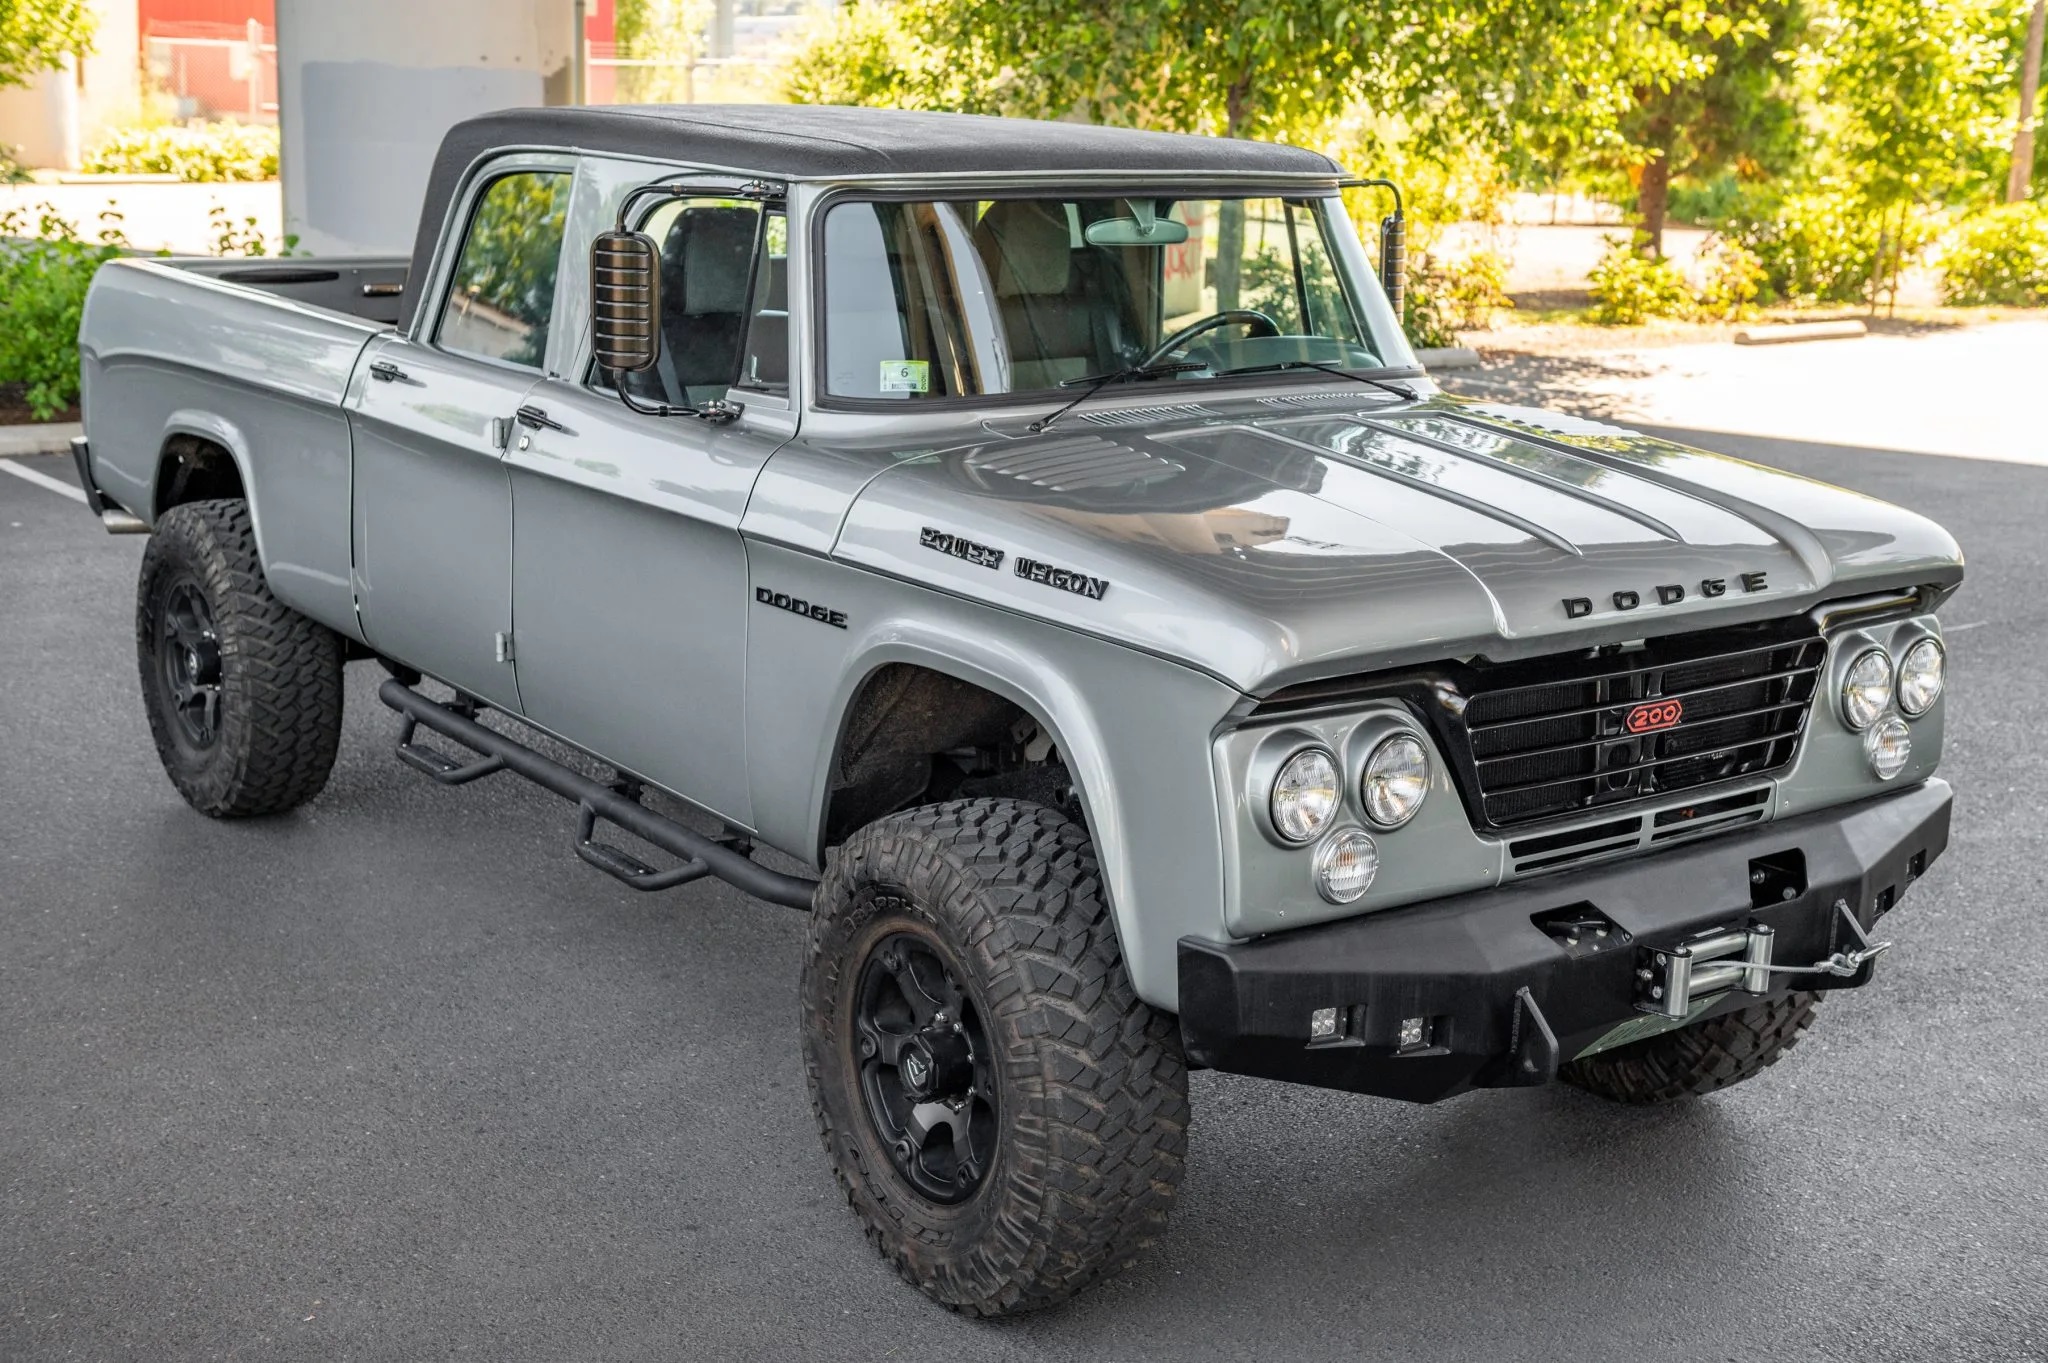 Check Out This Customized 1964 Dodge Power Wagon Crew Cab Swiptline